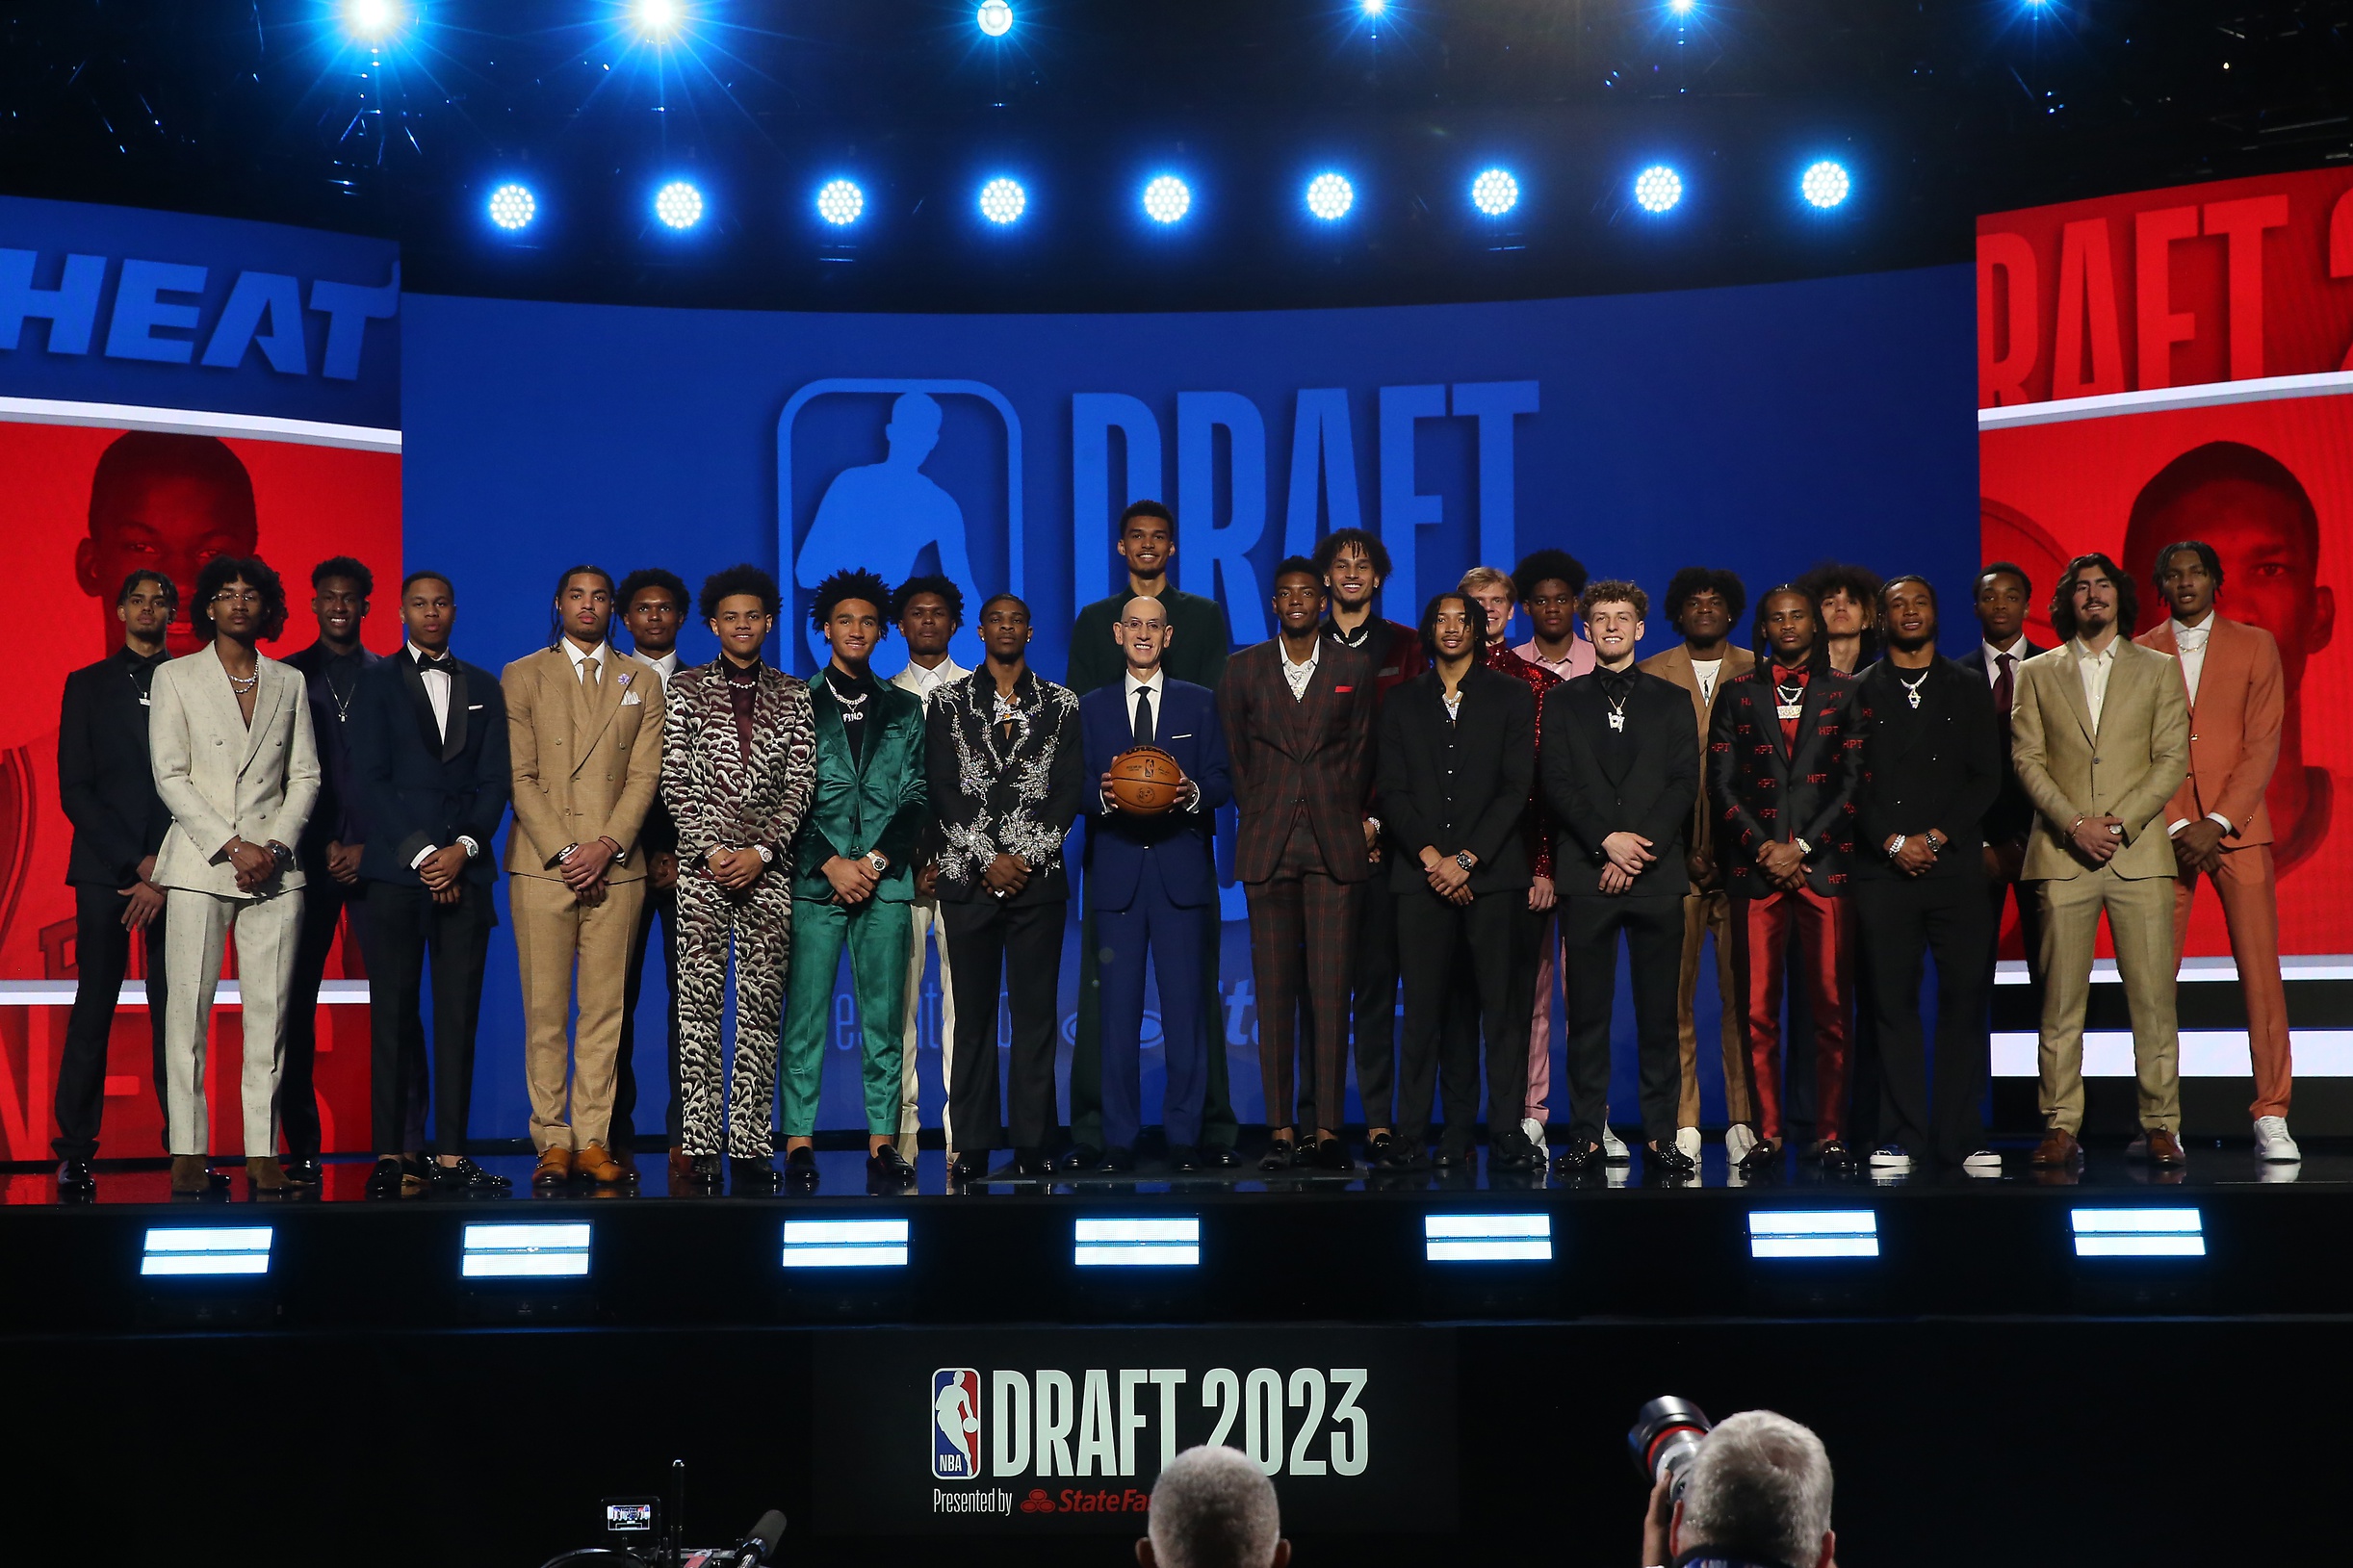 That's right! We've got the #1 2023 NBA Draft Pick in-stock at NBA